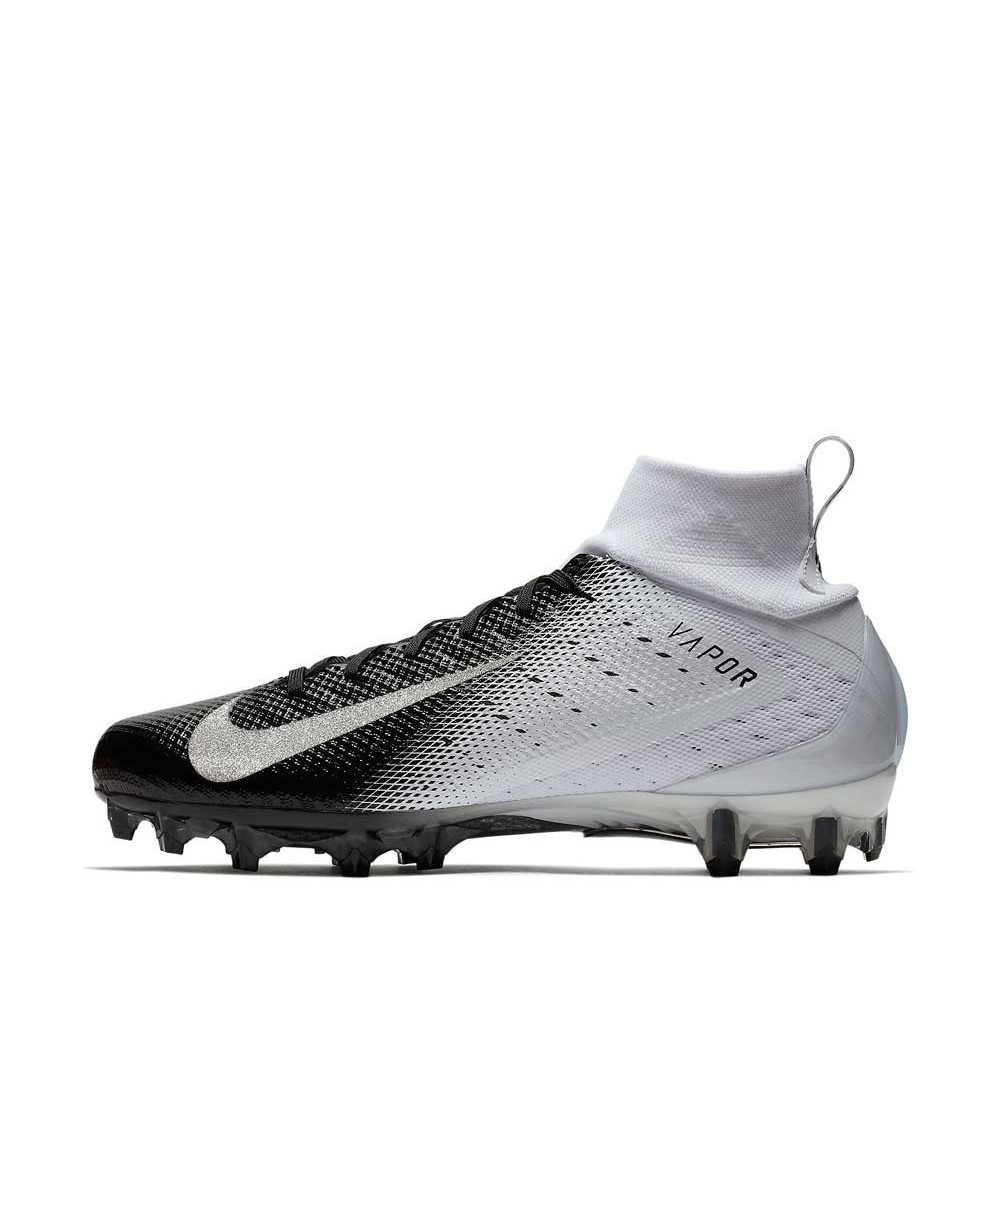 black and white cleats